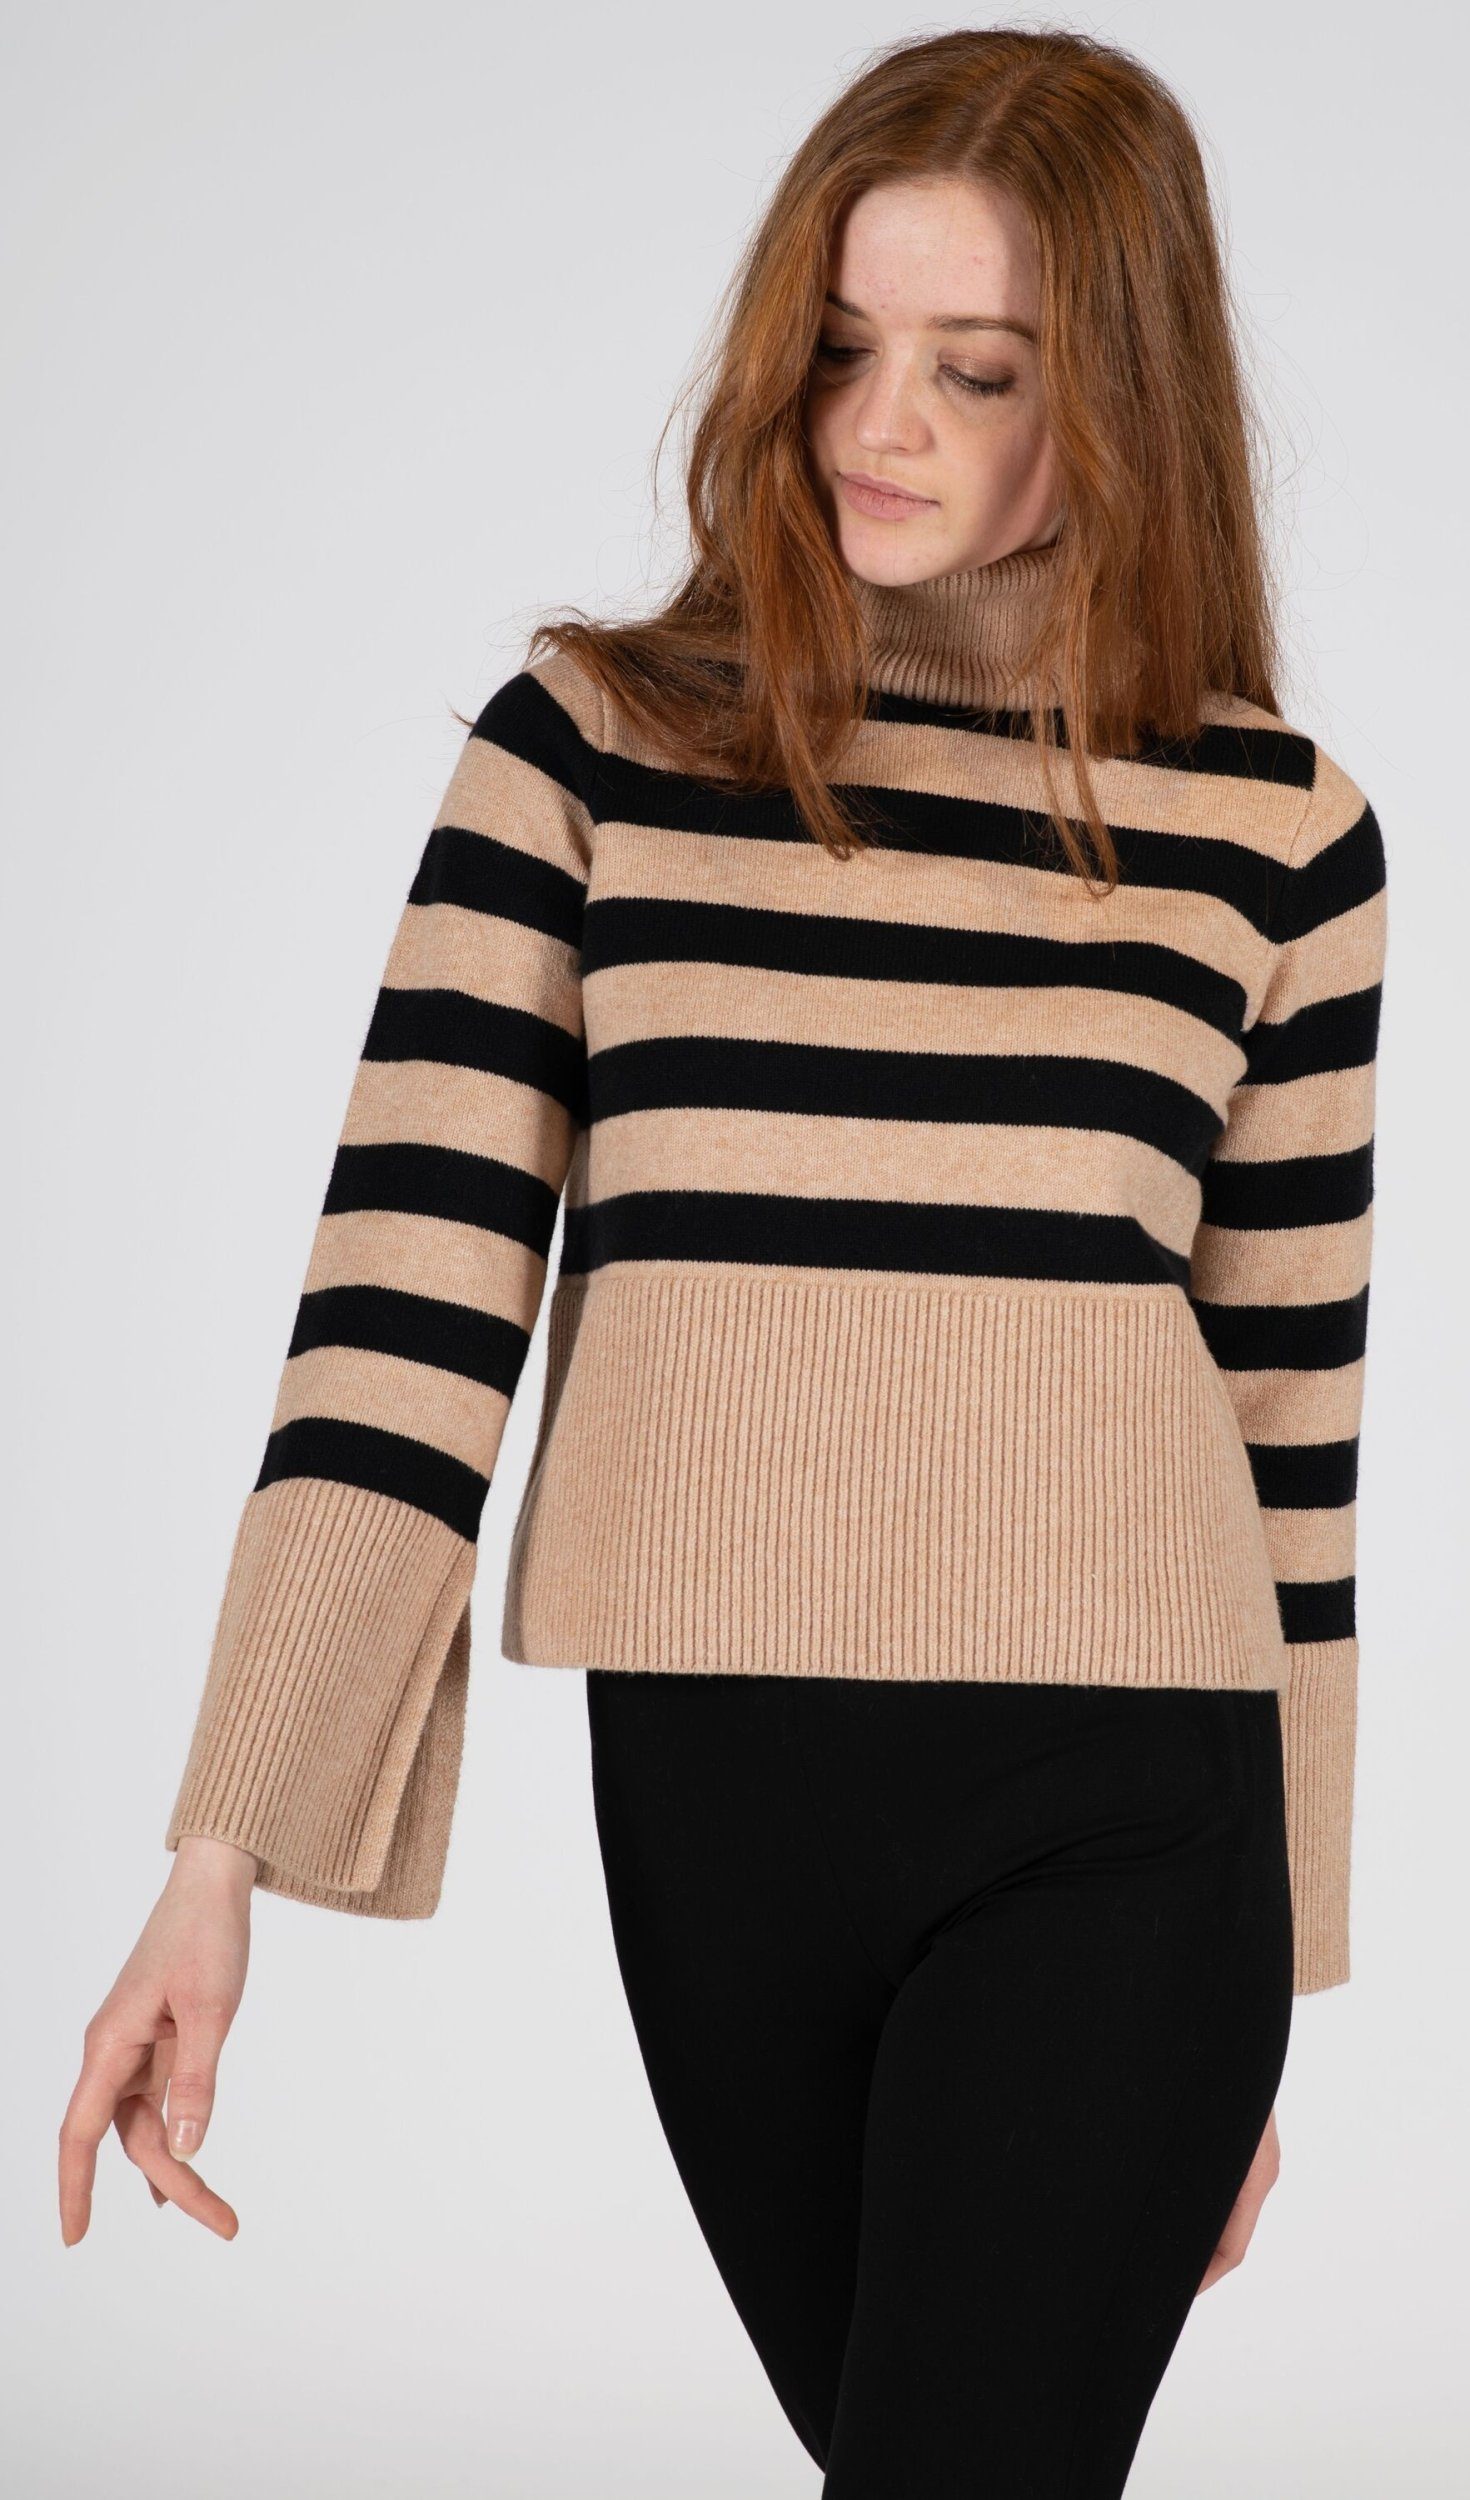 THE FASHION PEOPLE Rundhalspullover Cropped striped, Turtleneck